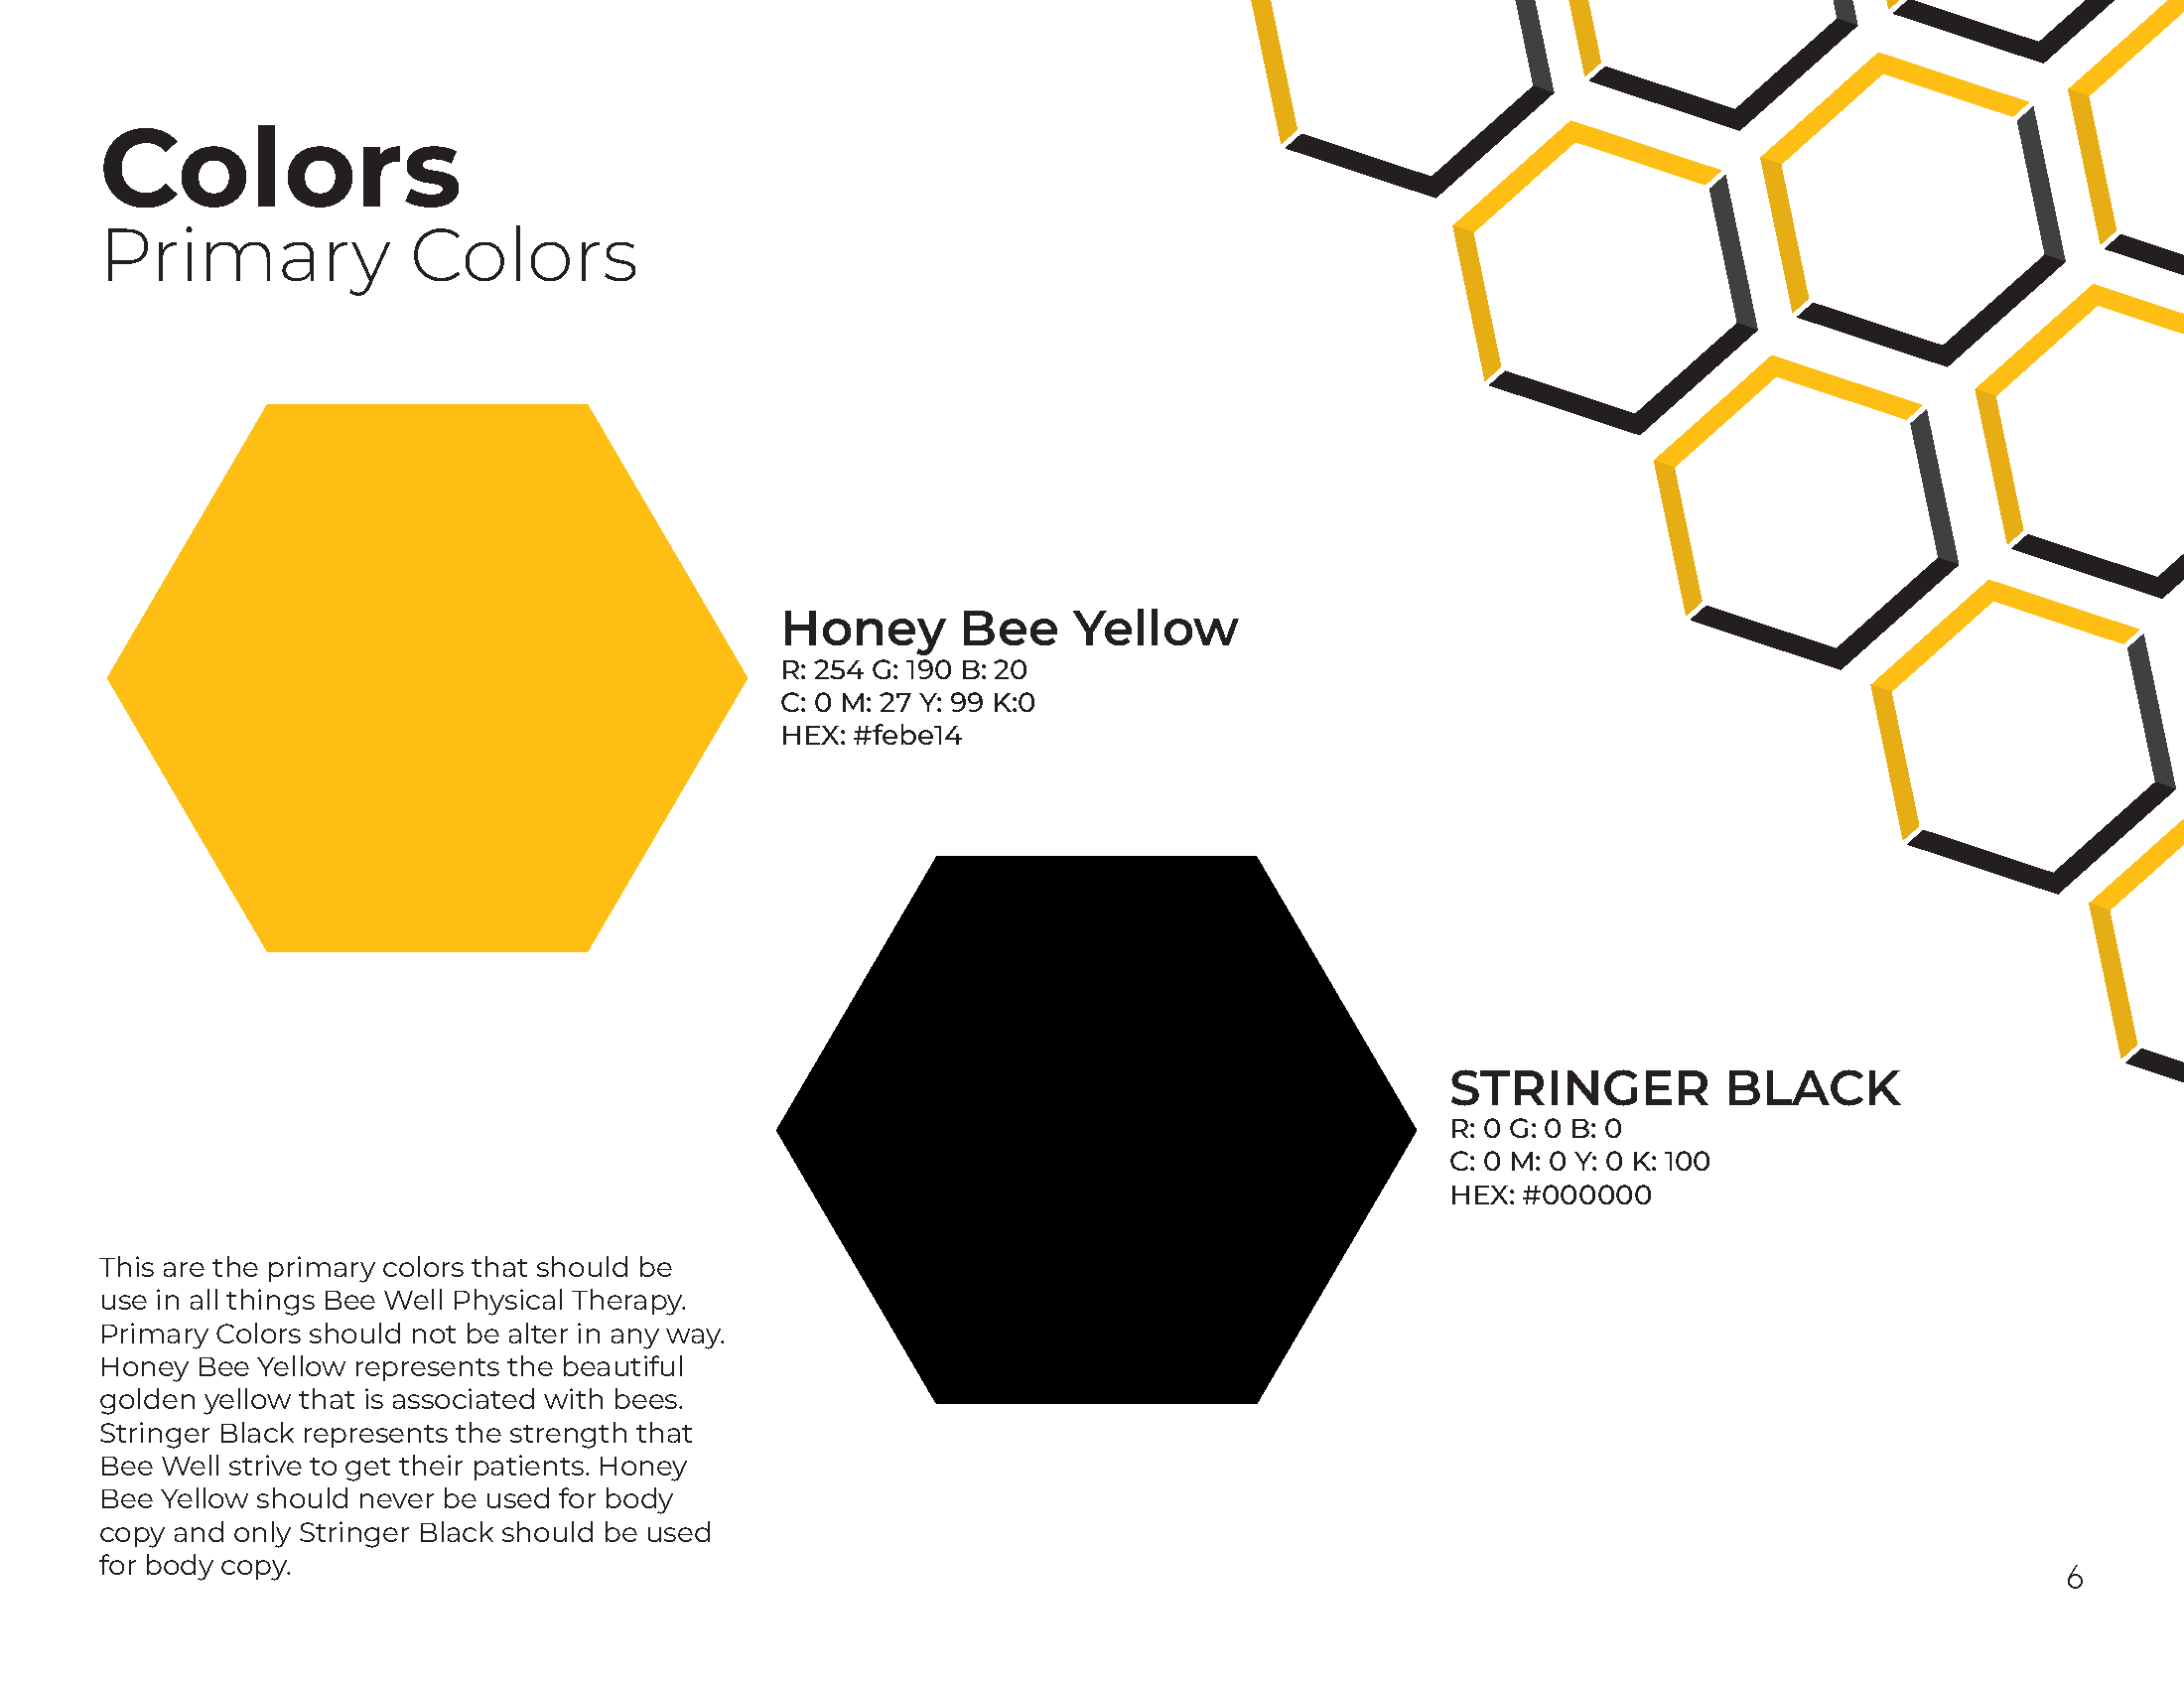 The primary colors for this brand are Honey Bee Yellow and Stinger Black.